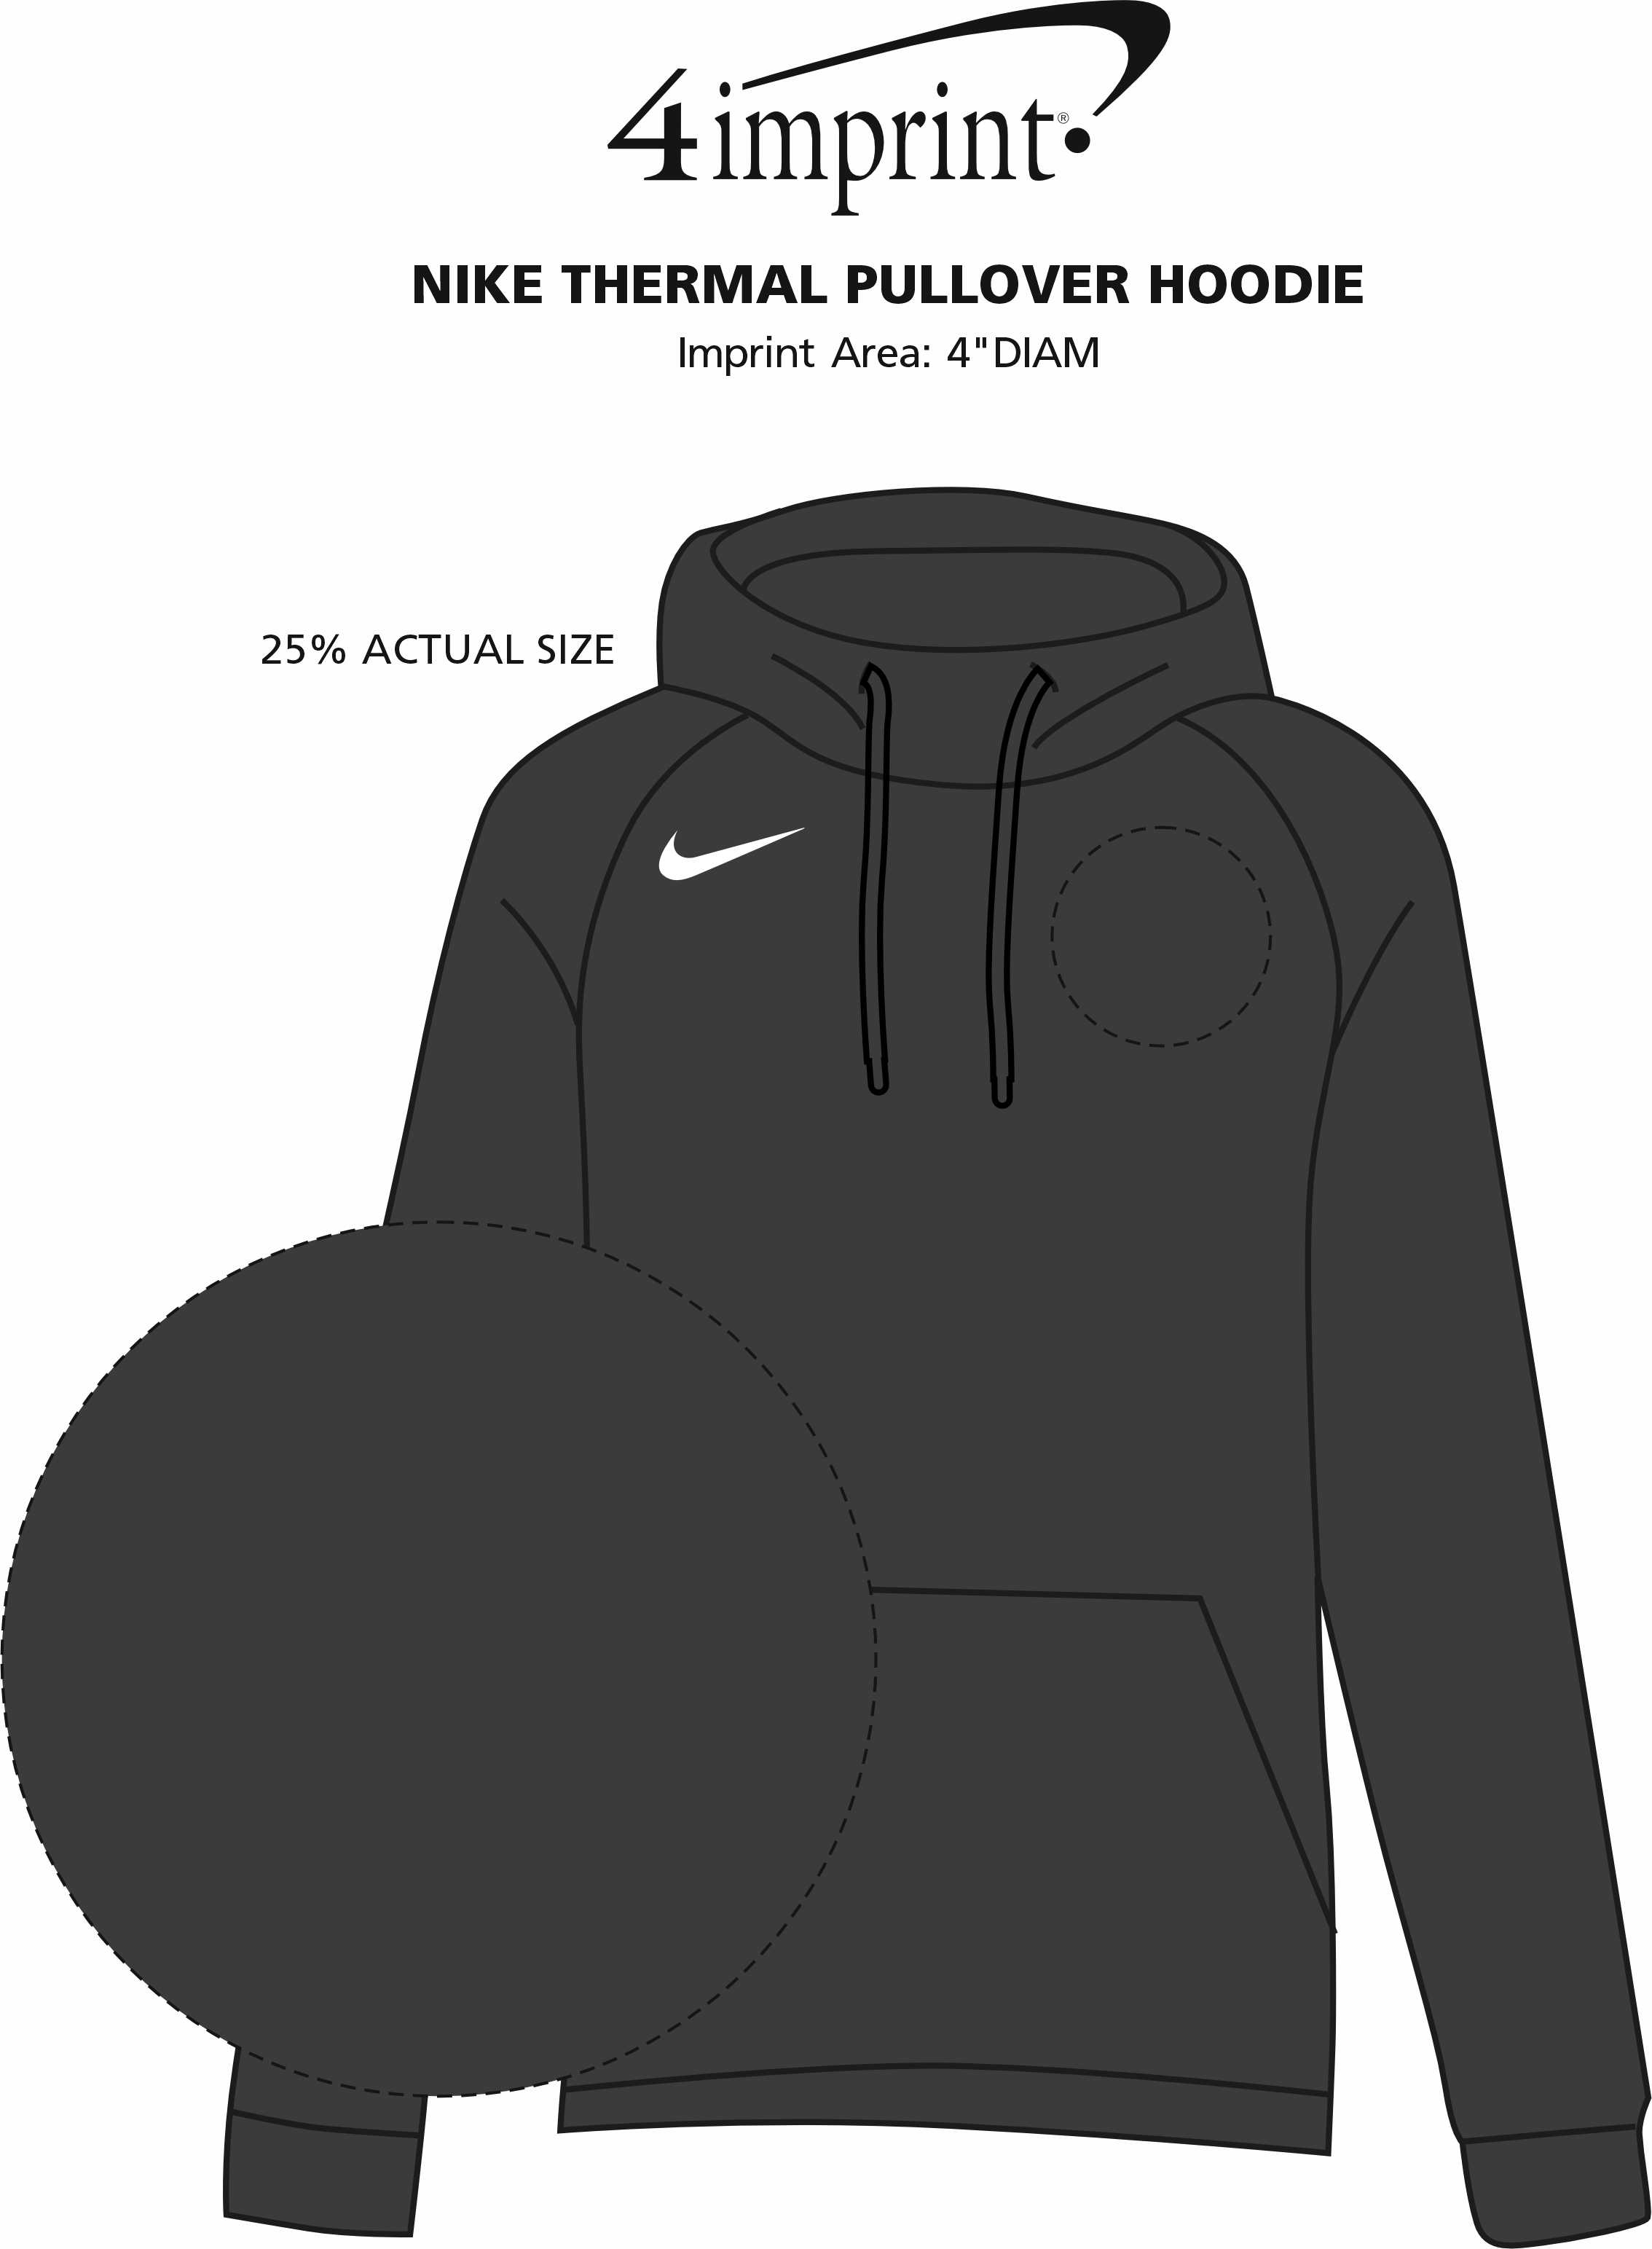 Imprint Area of Nike Thermal Pullover Hoodie - Embroidered